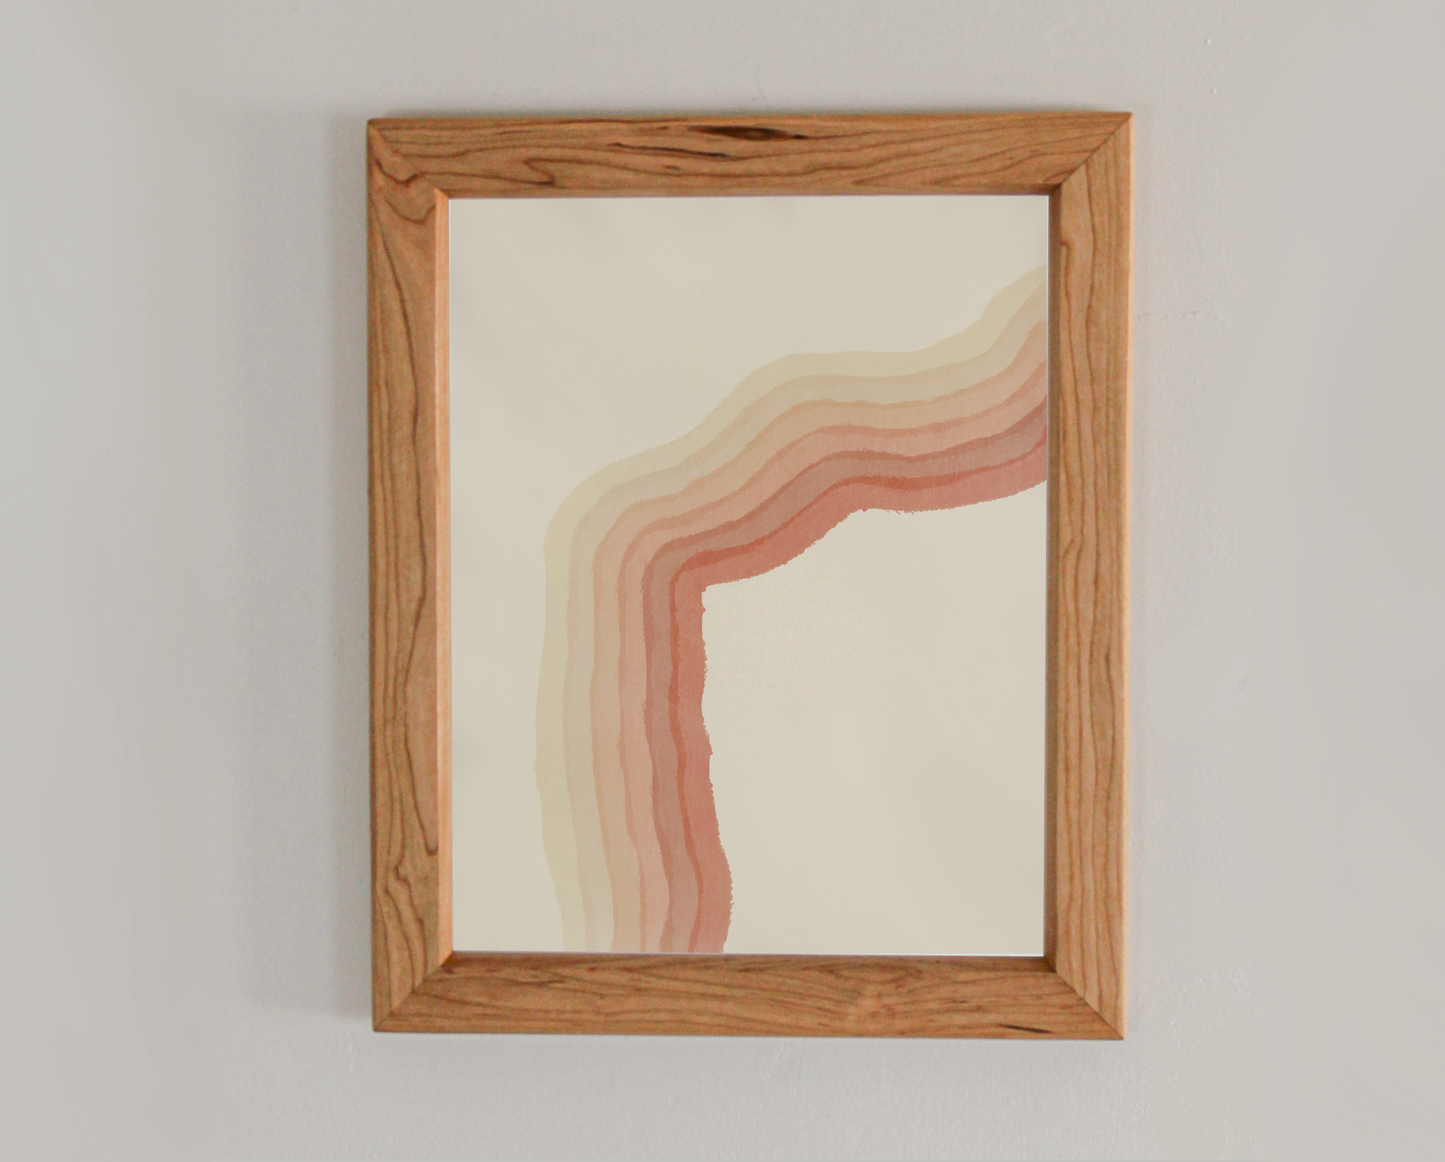 Abstract art print with various gradients of red in a cherry frame inspired by the crashing waves of the Atlantic coast